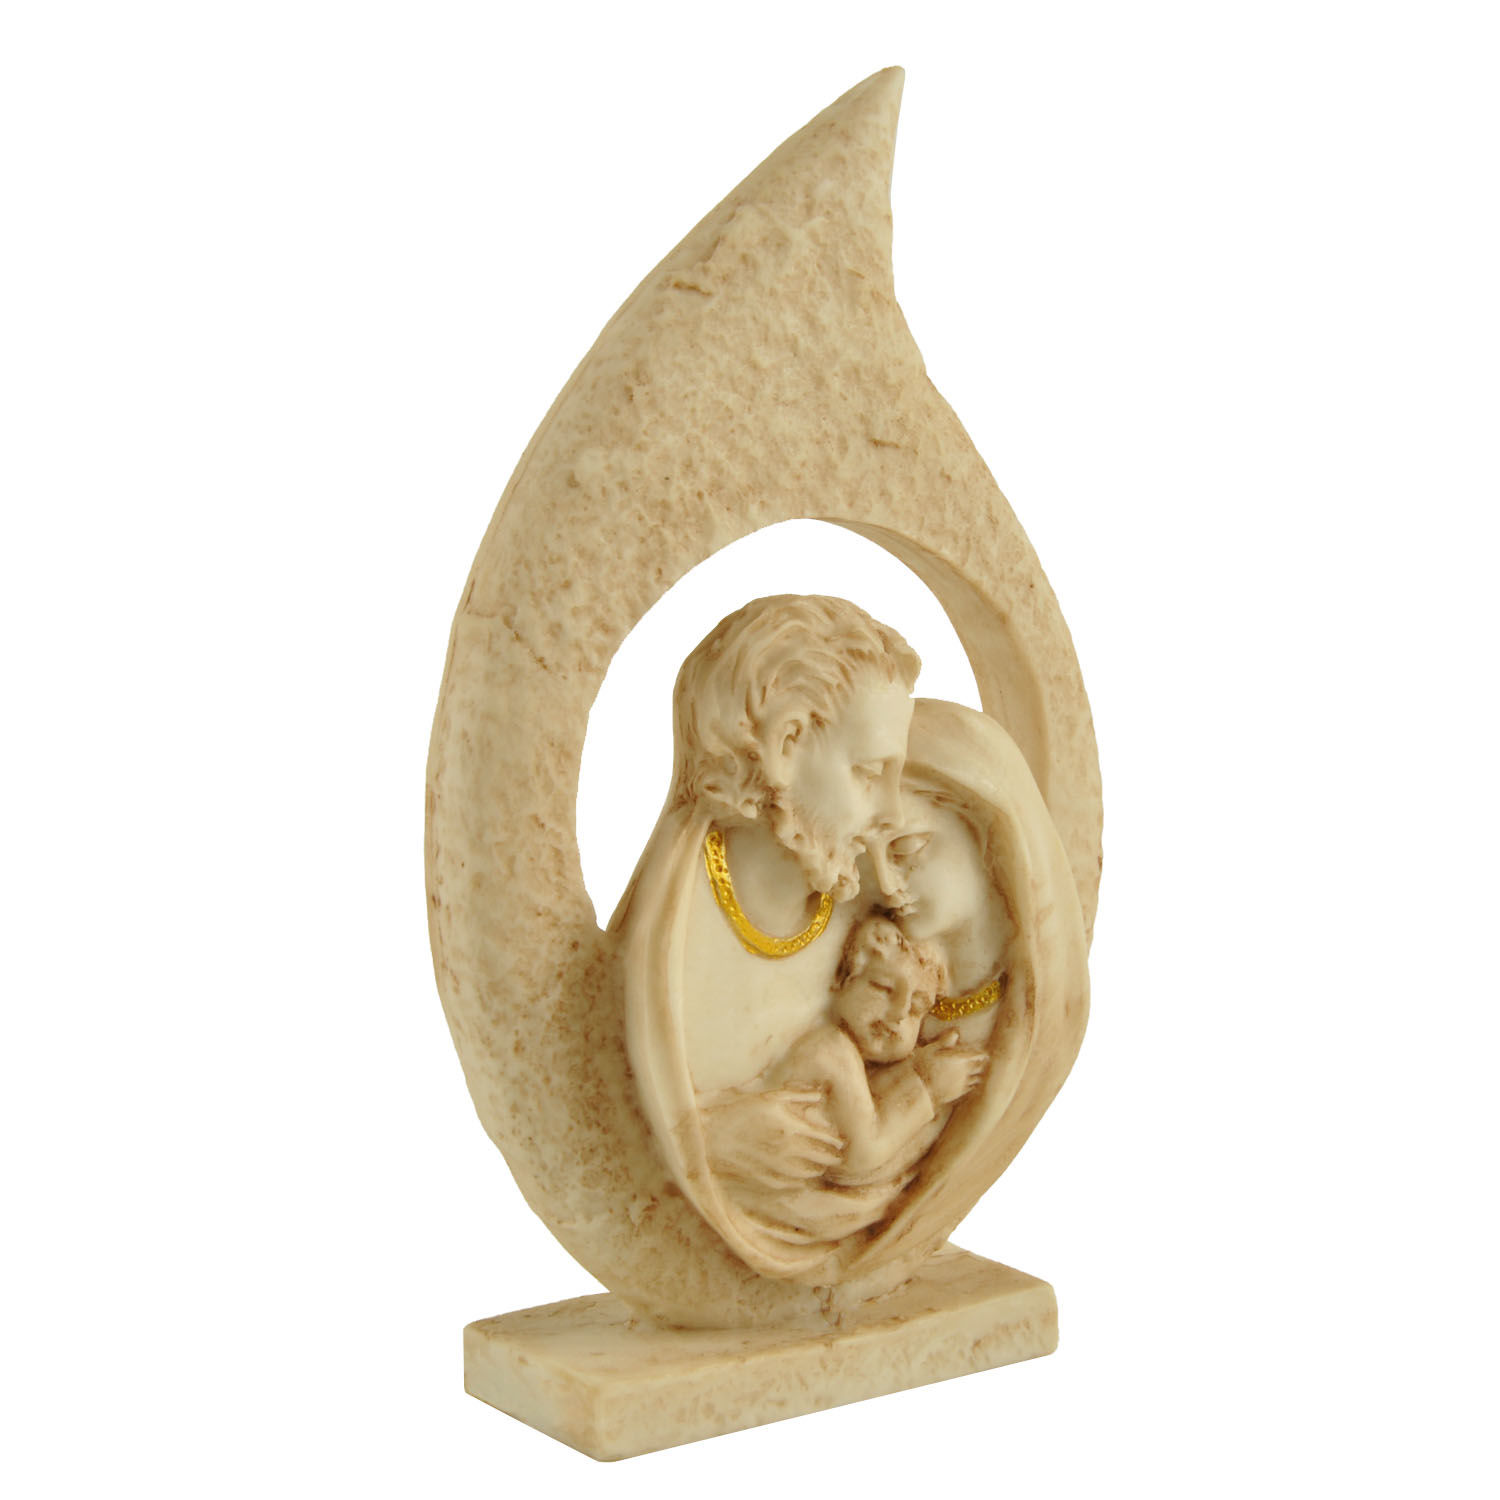 In Stock Polyresin Decorative Nativity Sets Holy Family Figurine For Home Decor